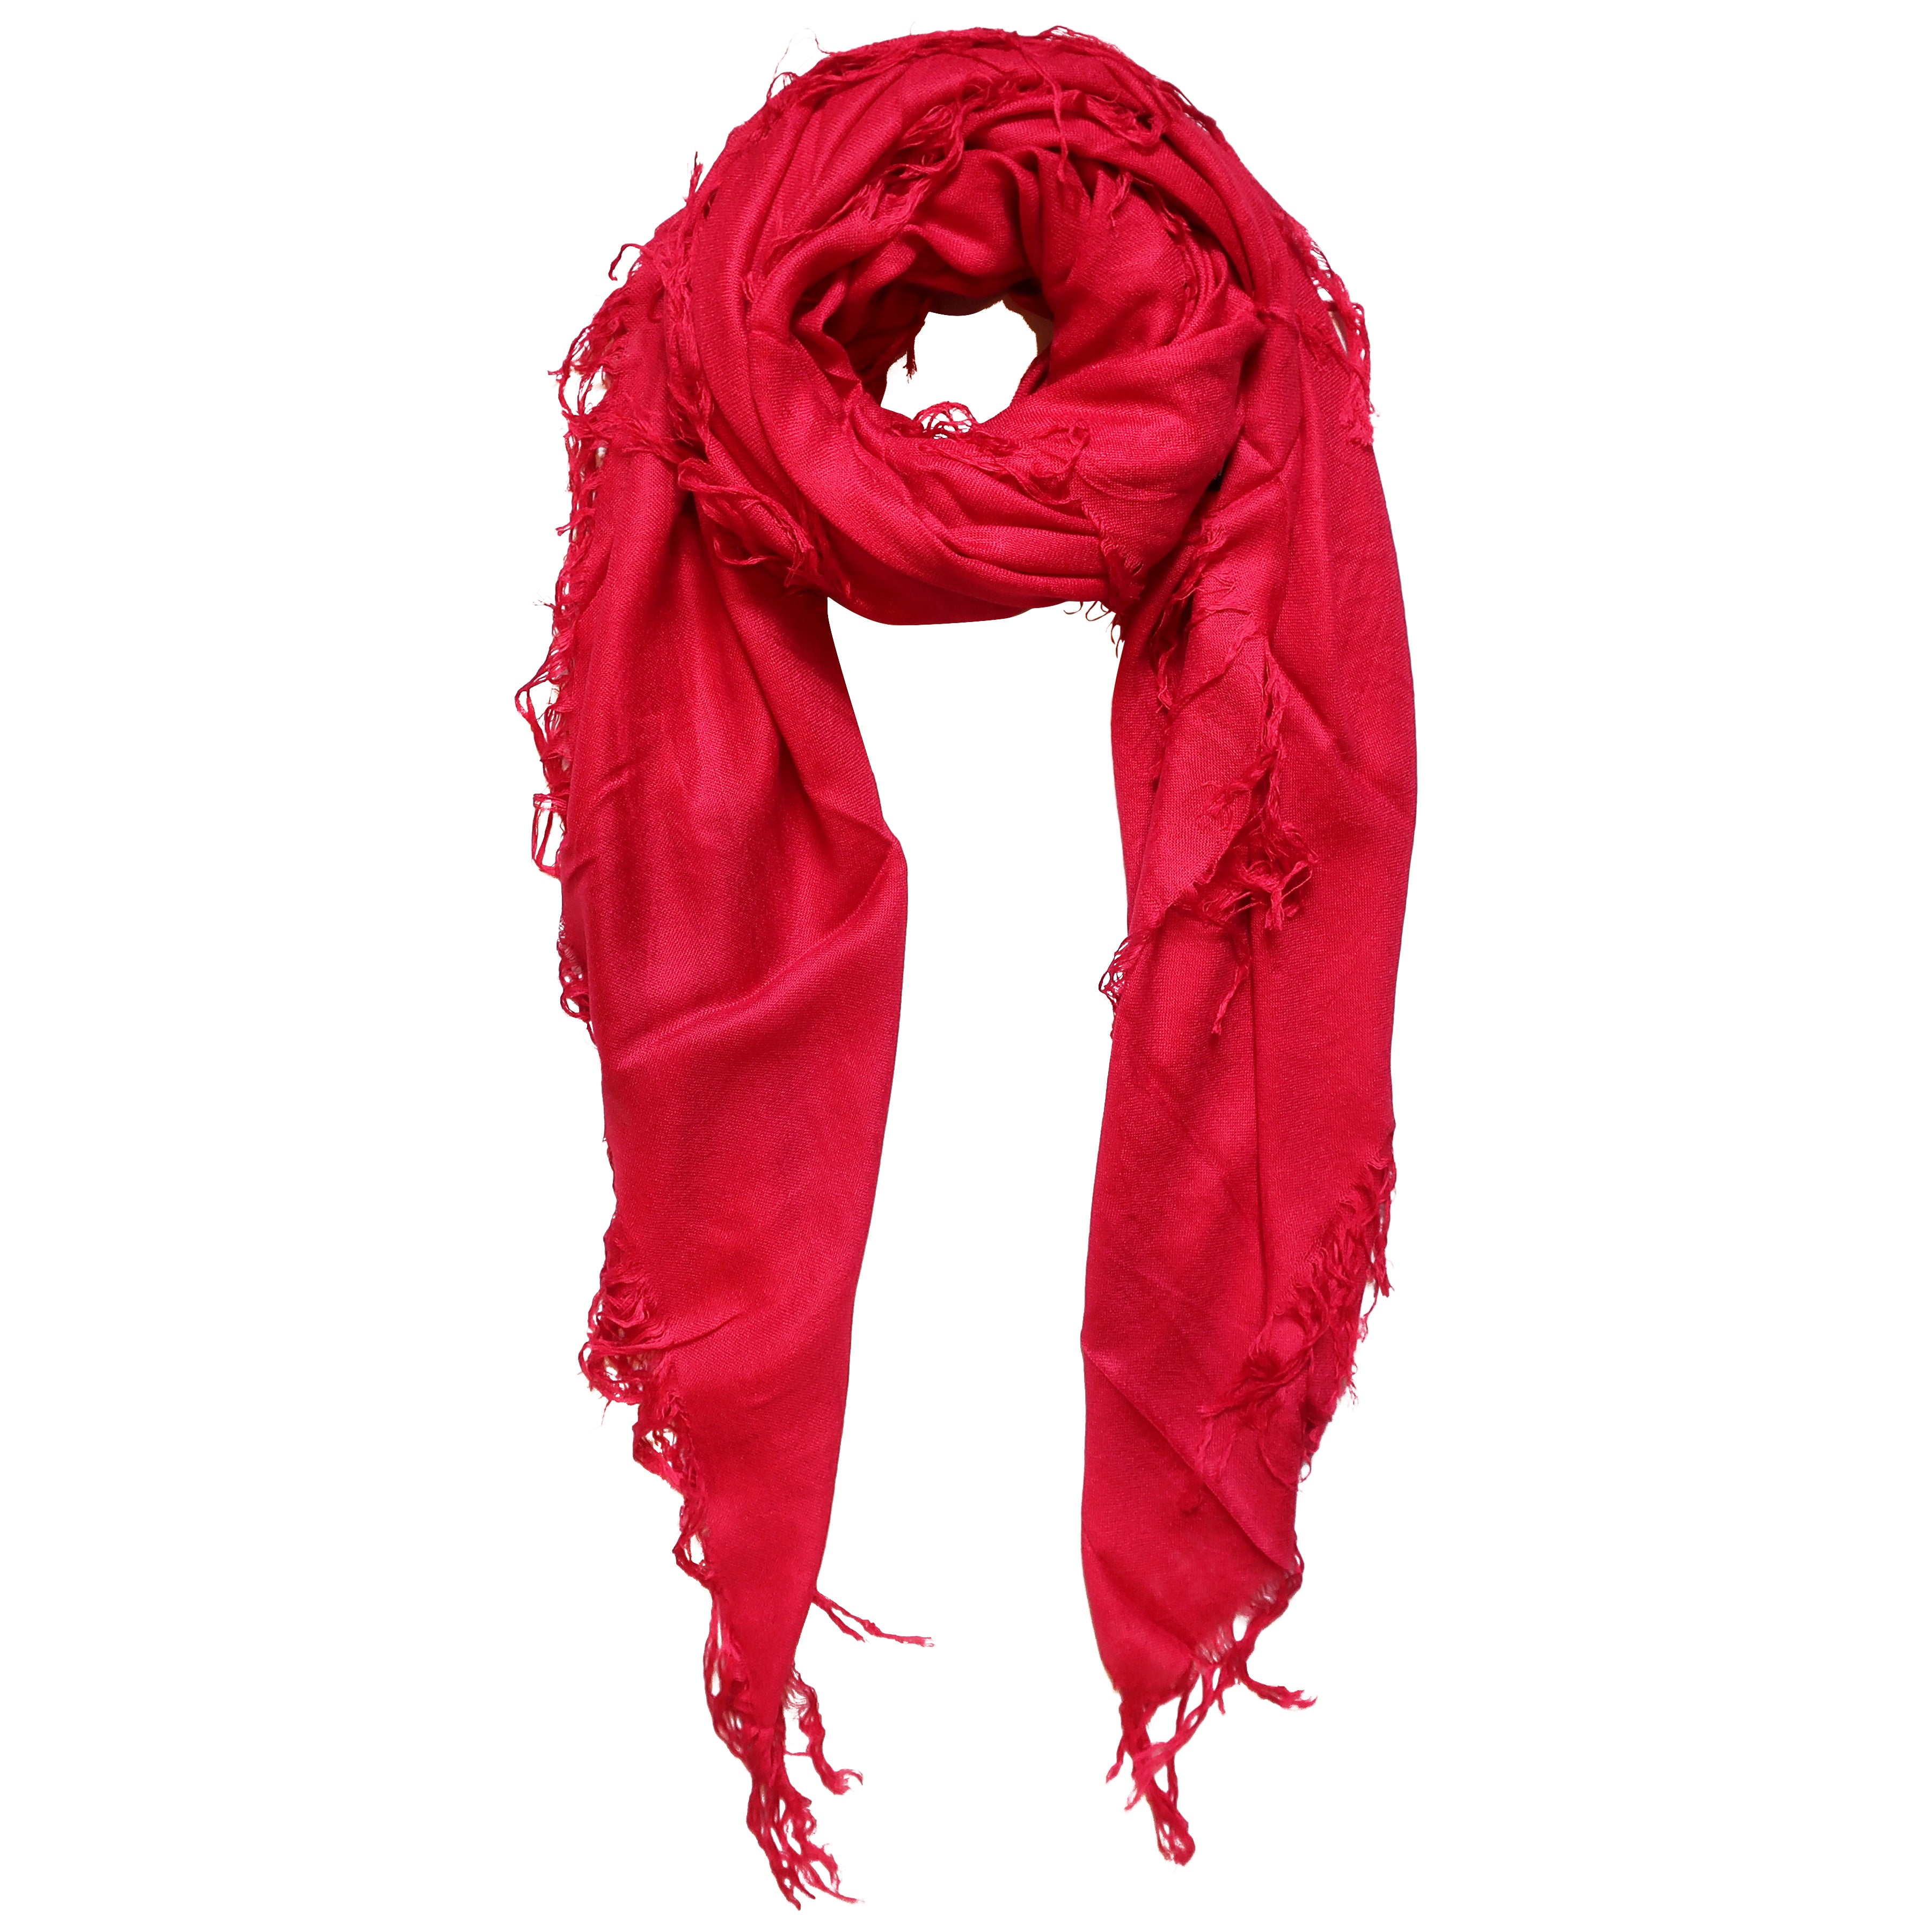 Blue Pacific Tissue Solid Modal and Cashmere Scarf Shawl in Chili Pepper Red